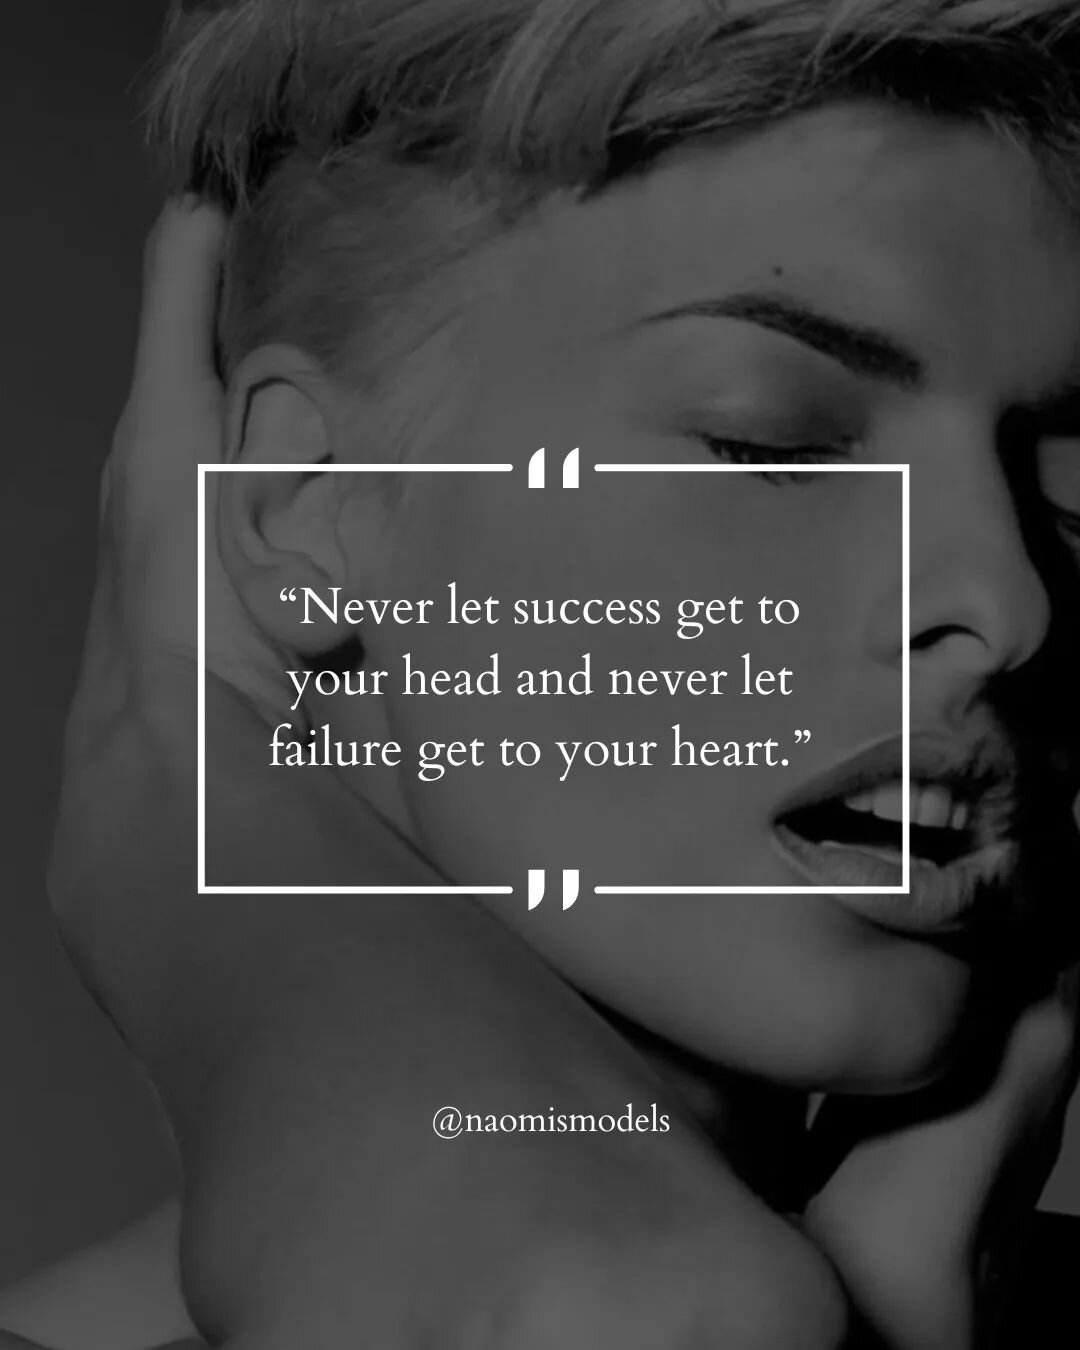 &ldquo;Never let success get to your head and never let failure get to your heart.&rdquo;

#naomismodels #quoteoftheday #inspiration #motivation #models #nycmodels #castingagency #modelscout #selflove #selfcare